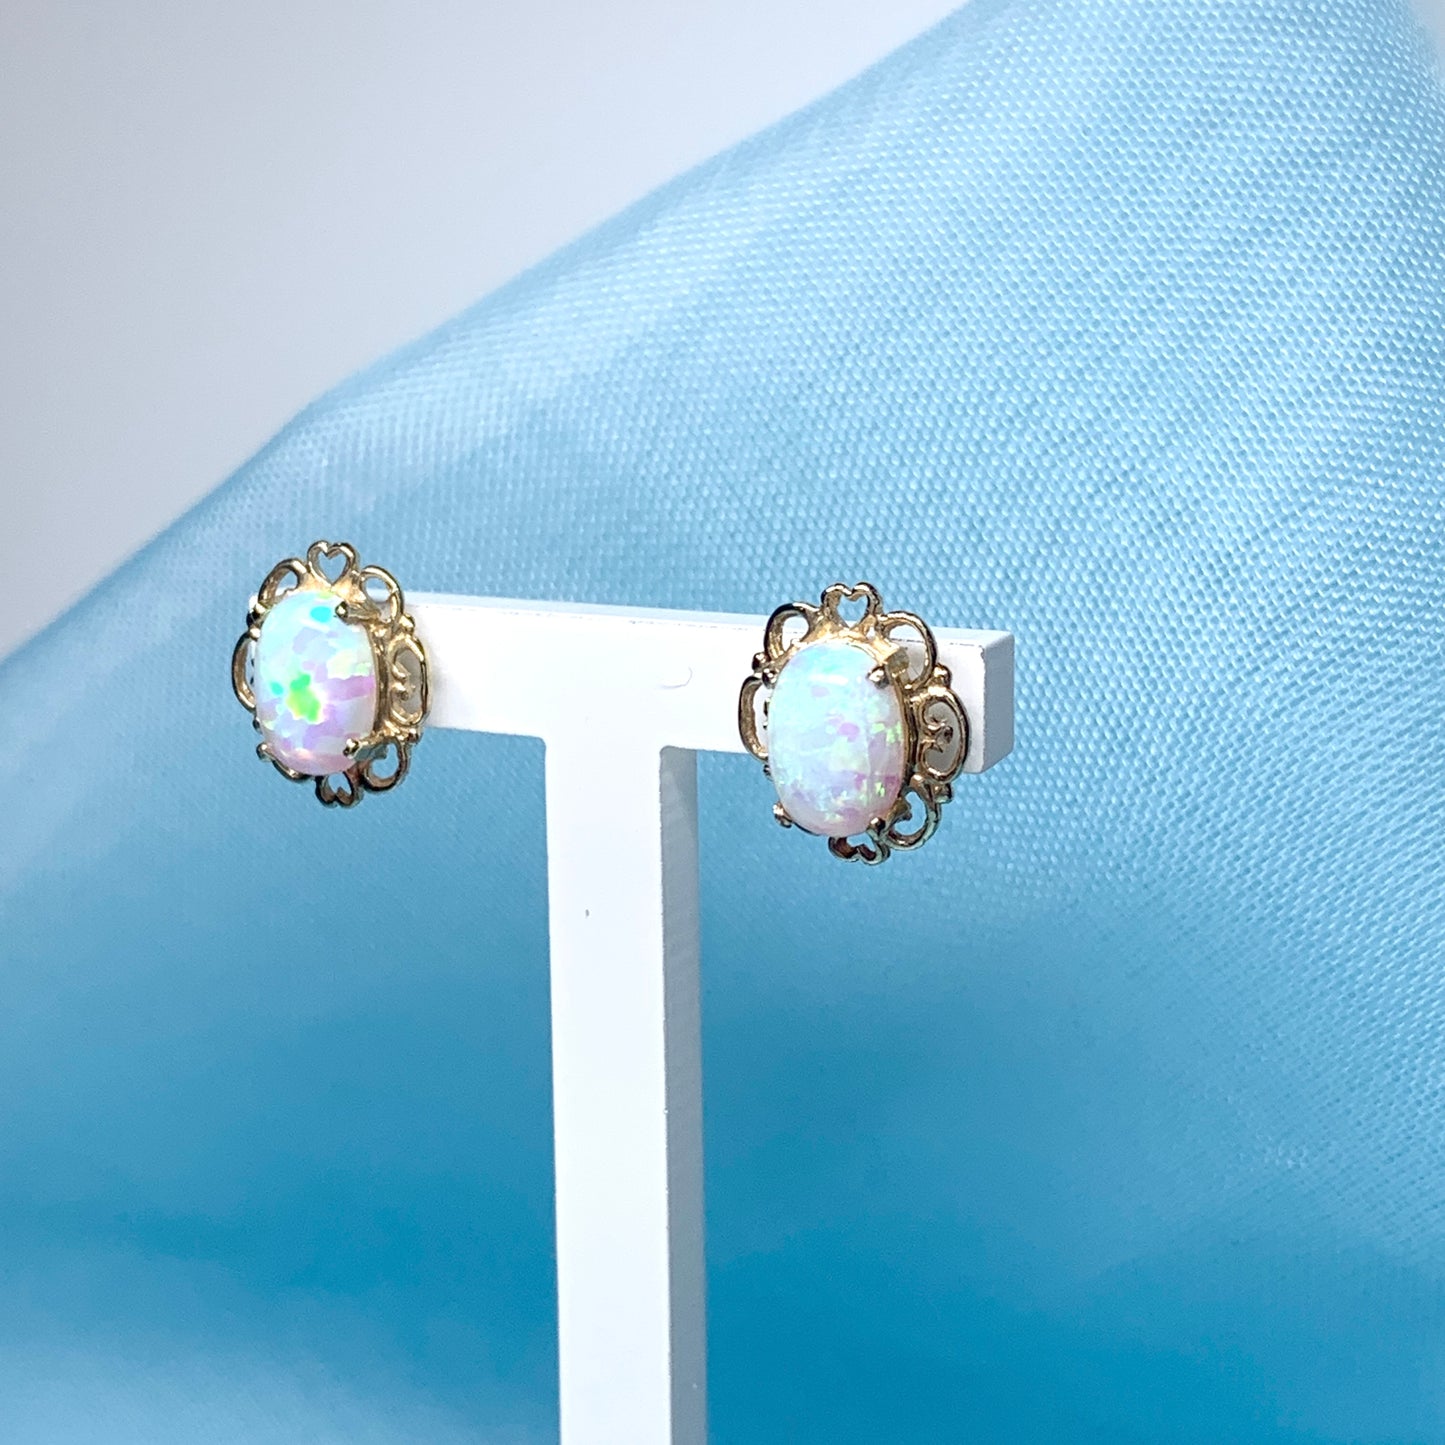 Yellow gold oval opal stud earrings with a pierced setting